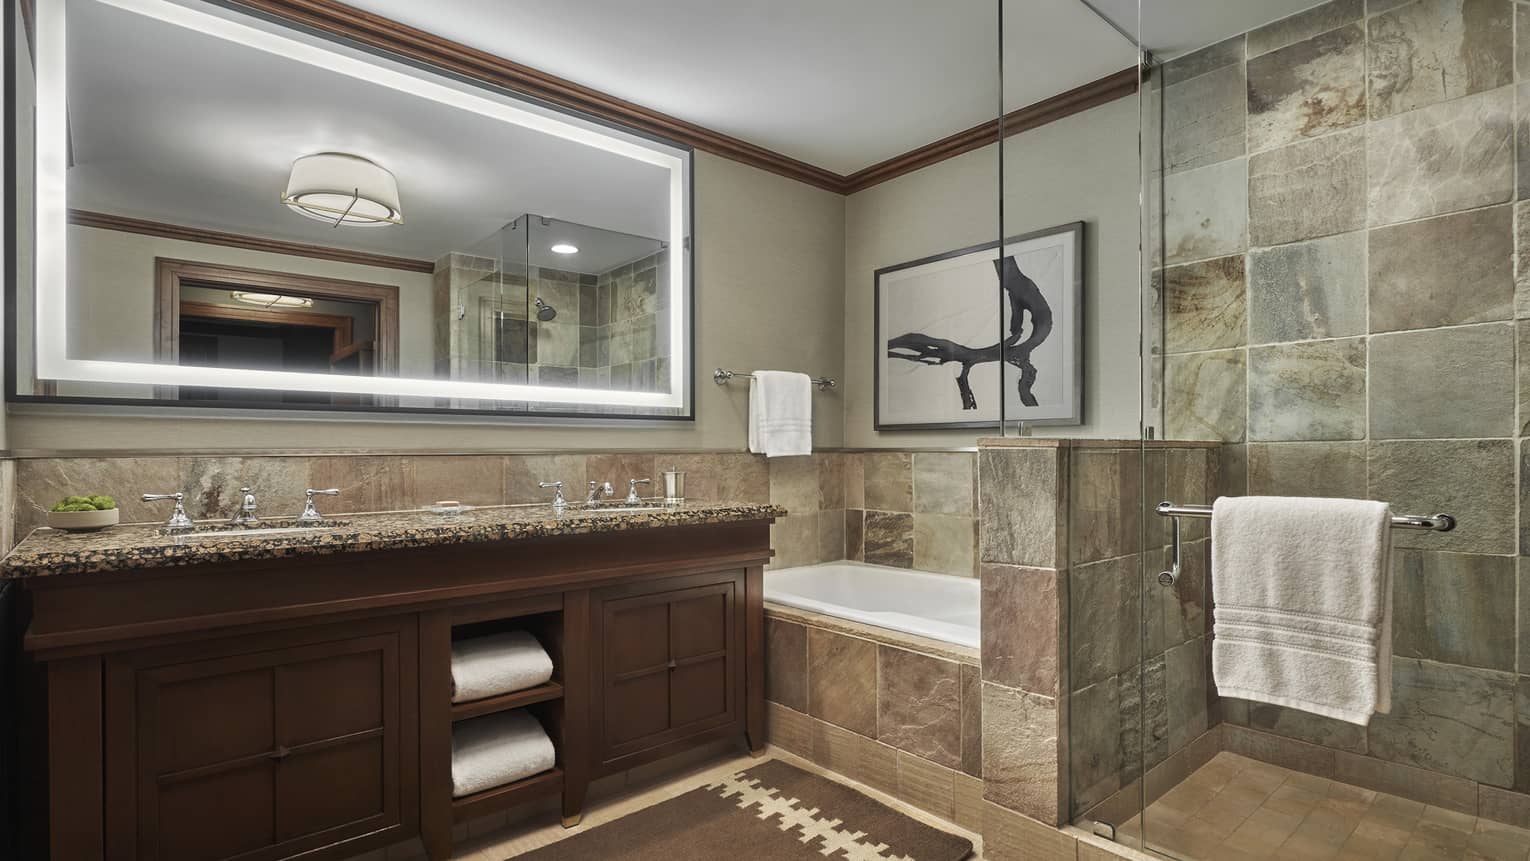 A tiled bathroom, with a double vanity, large lighted mirror and a shower and tub separated by a glass partition